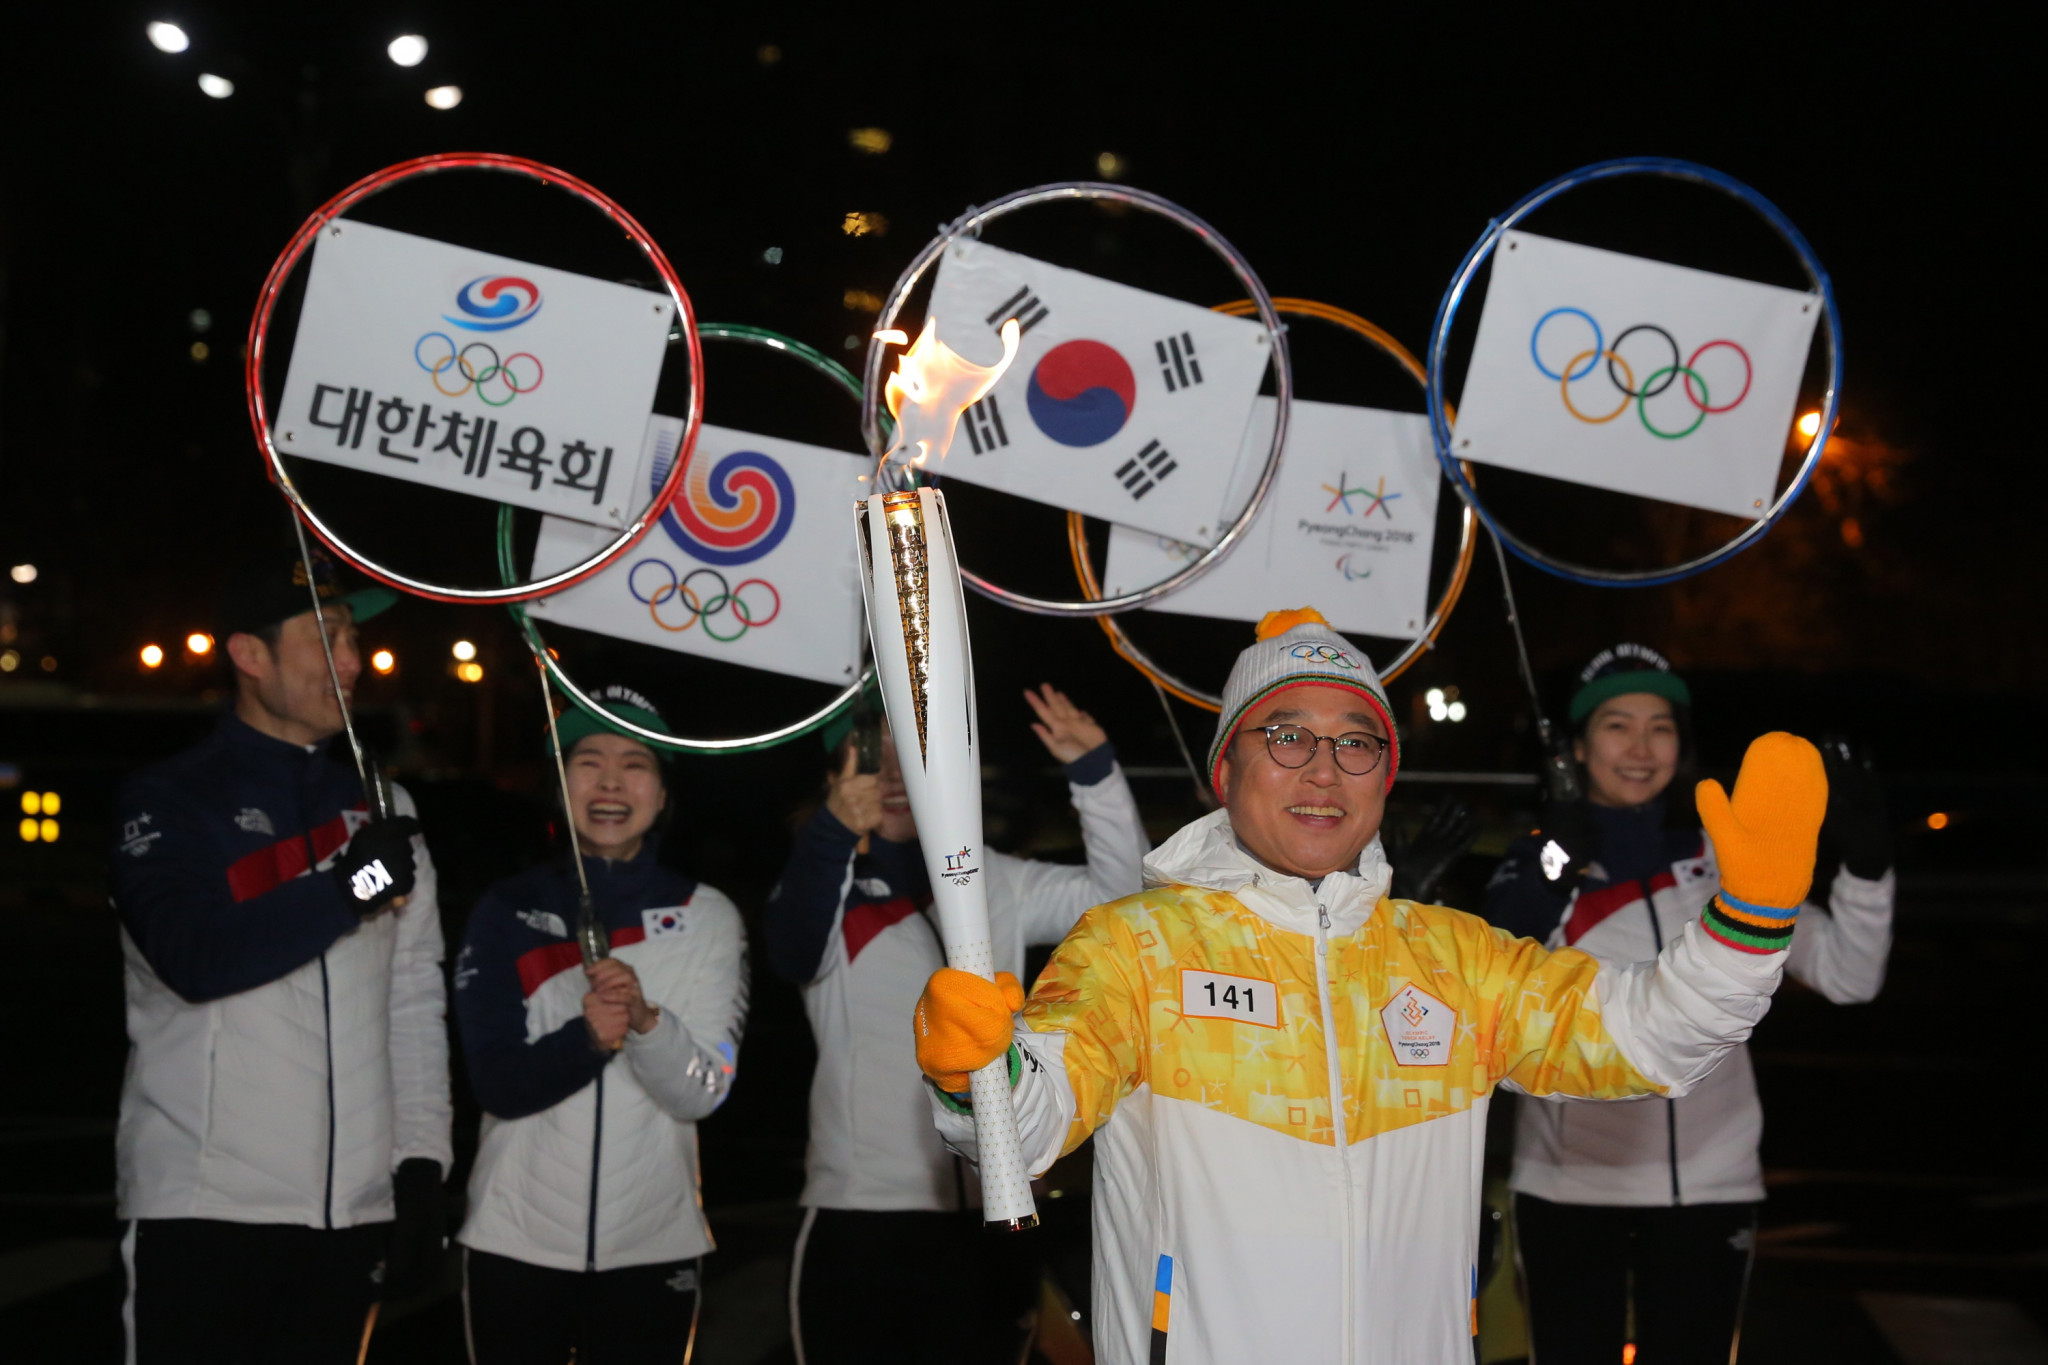 Pyeongchang 2018 Torch Relay continues journey in Seoul and prepares to head for border